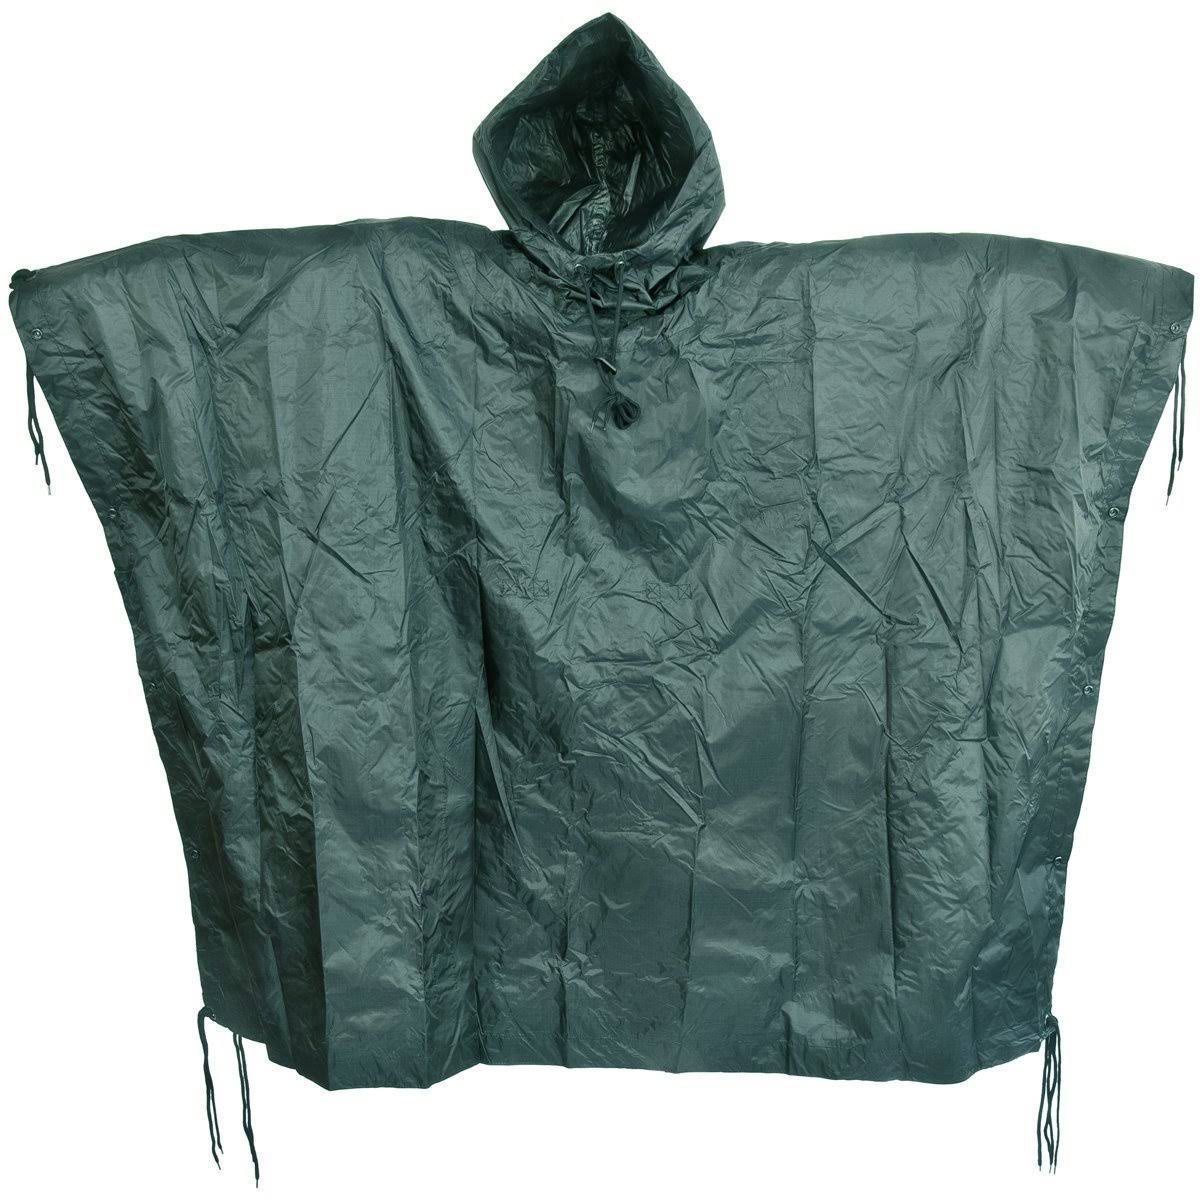 Mil-Tec Ripstop Wet Weather Poncho OD Green 10630001 - WGL-2-s